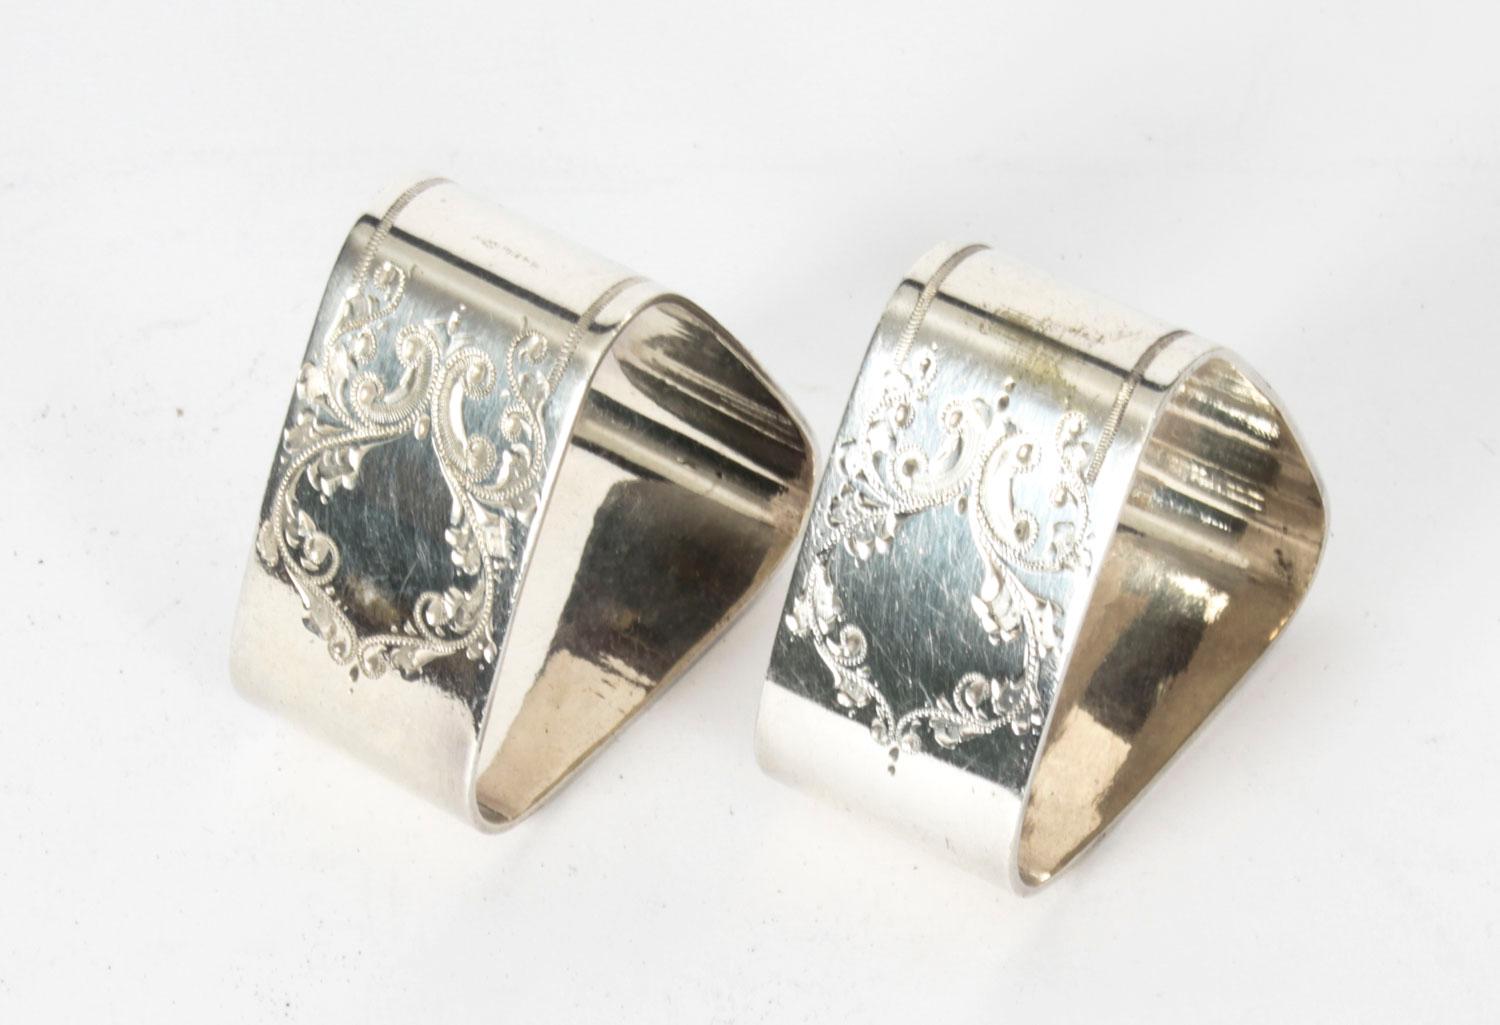 A lovely pair of antique Victorian silver-plated napkin rings circa 1880 in date.
 
The triangular shaped ring feature machine engraved fancy floral pattern and come in their original leather fitted case with purple silk interior.
 
The